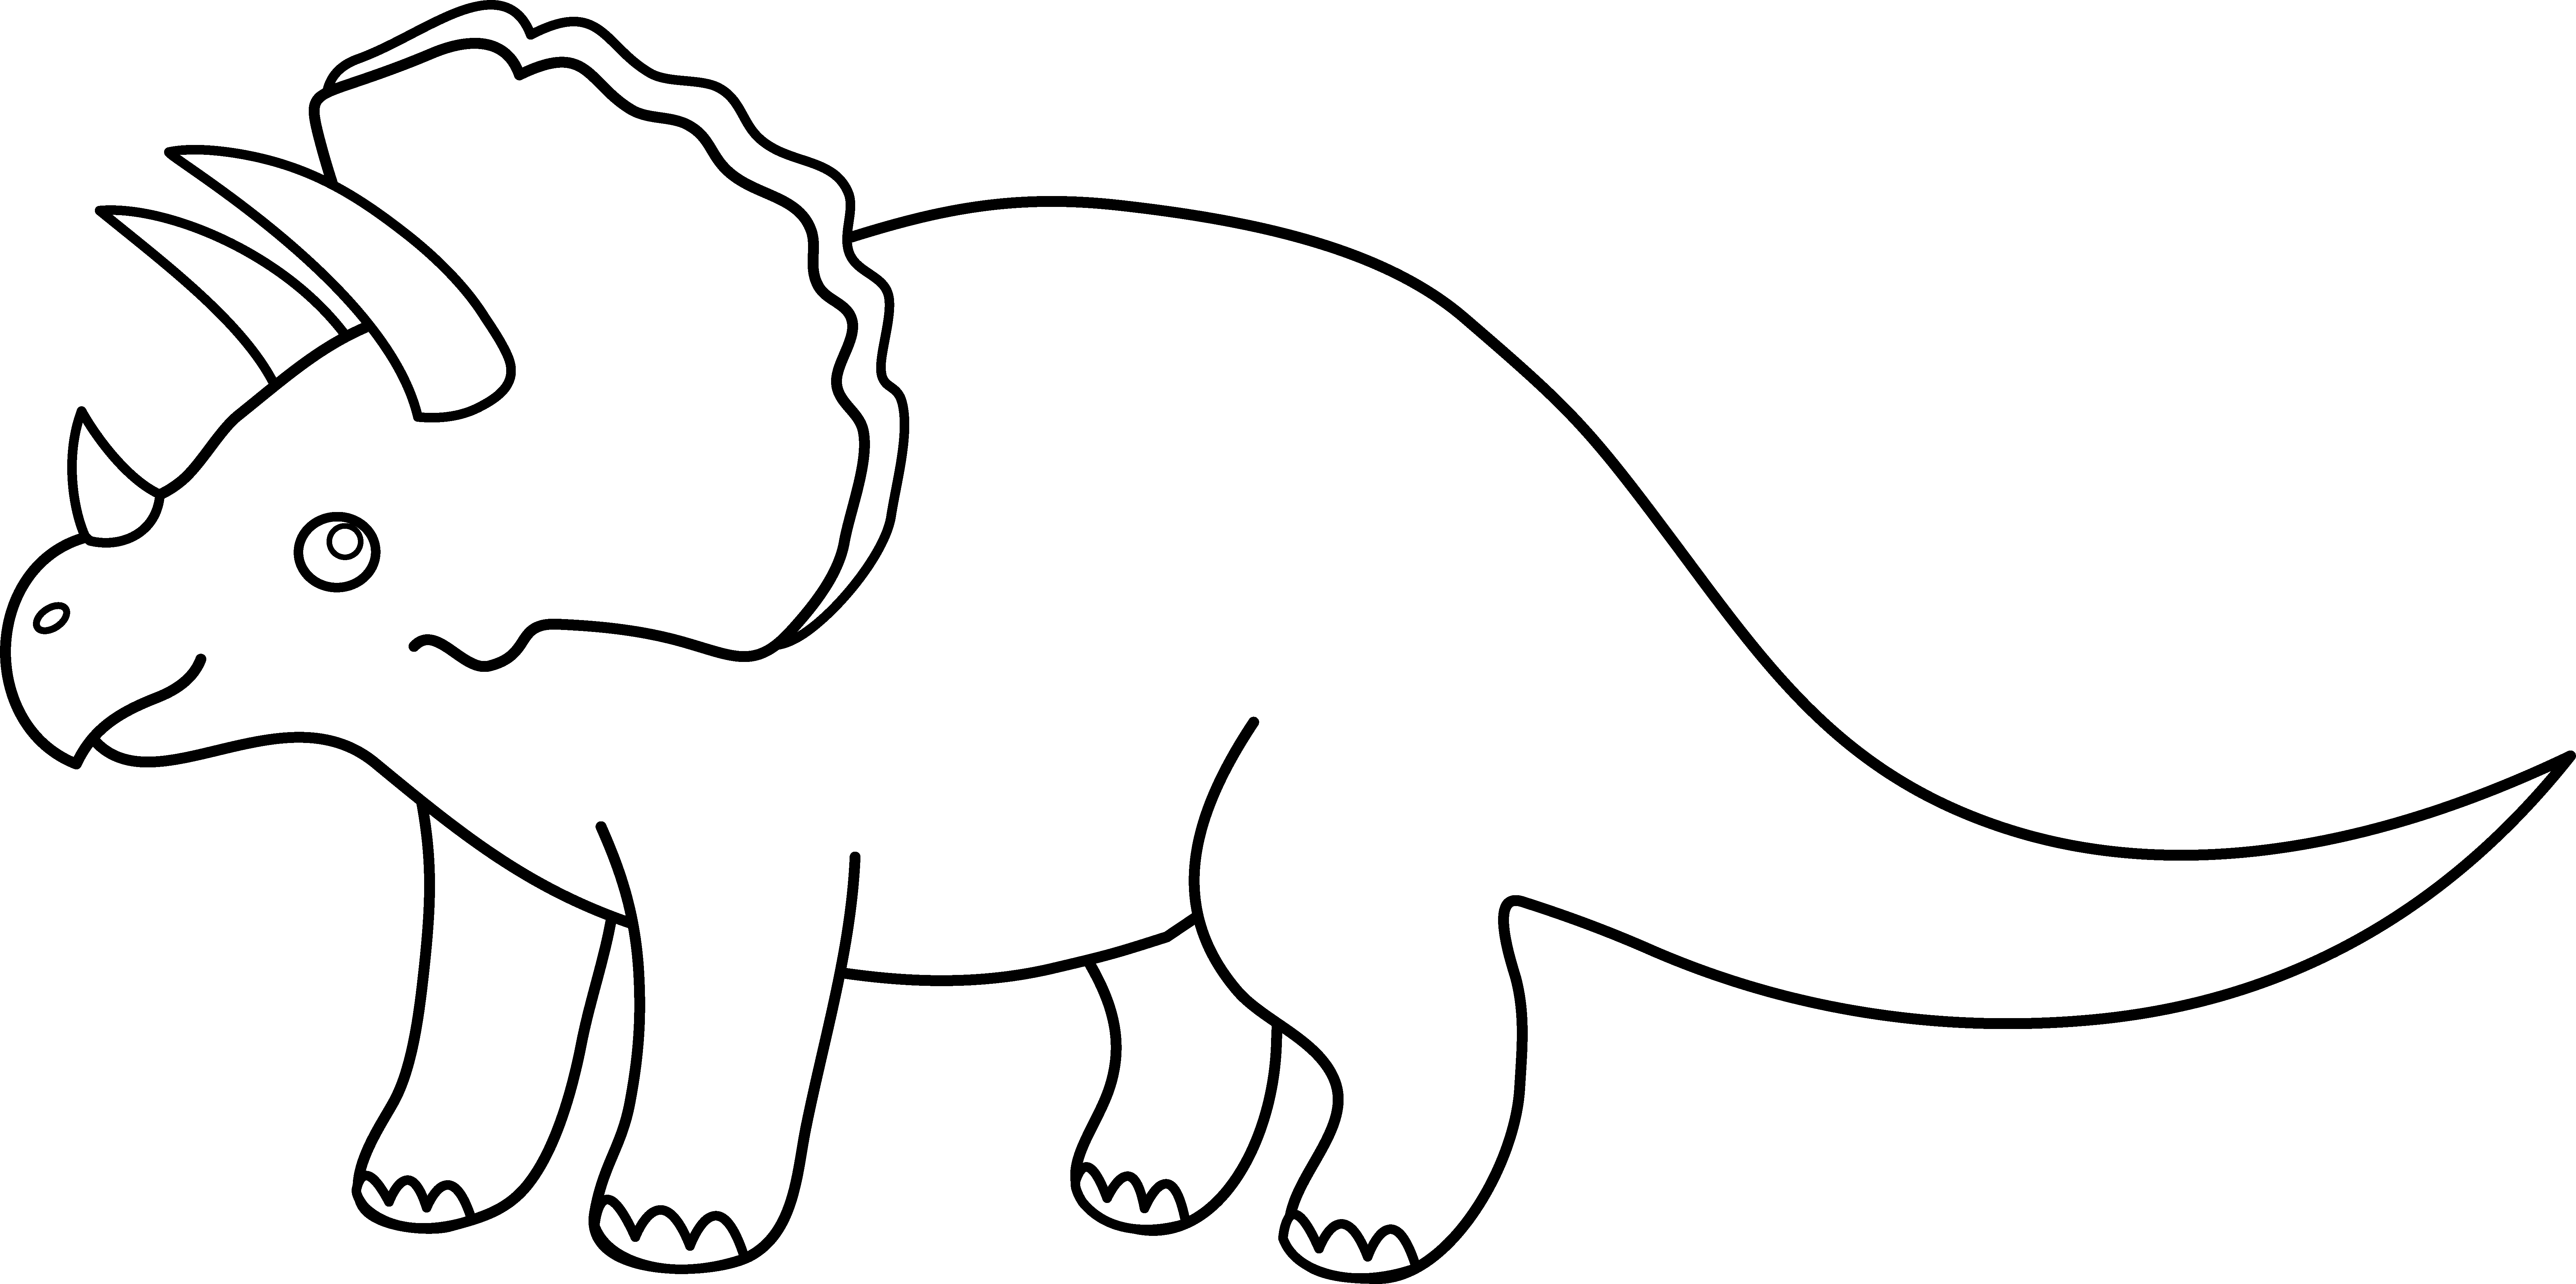 clipart outline of dinosaur - Clipground